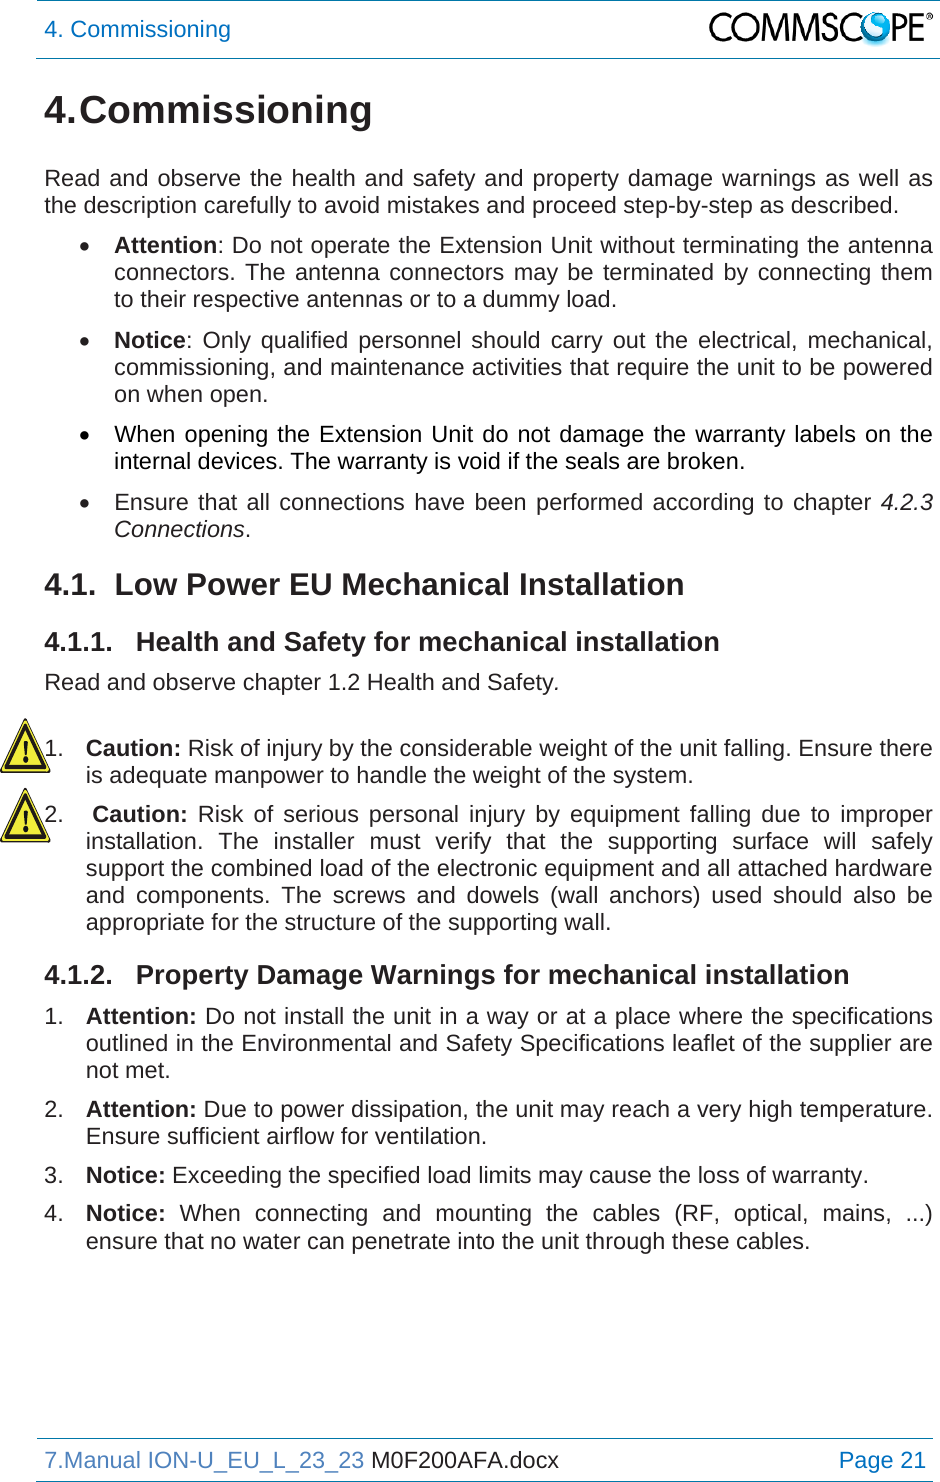 4. Commissioning  7.Manual ION-U_EU_L_23_23 M0F200AFA.docx Page 21 4. Commissioning  Read and observe the health and safety and property damage warnings as well as the description carefully to avoid mistakes and proceed step-by-step as described.  Attention: Do not operate the Extension Unit without terminating the antenna connectors. The antenna connectors may be terminated by connecting them to their respective antennas or to a dummy load.  Notice: Only qualified personnel should carry out the electrical, mechanical, commissioning, and maintenance activities that require the unit to be powered on when open.   When opening the Extension Unit do not damage the warranty labels on the internal devices. The warranty is void if the seals are broken.   Ensure that all connections have been performed according to chapter 4.2.3 Connections. 4.1.  Low Power EU Mechanical Installation 4.1.1.  Health and Safety for mechanical installation Read and observe chapter 1.2 Health and Safety.  1.  Caution: Risk of injury by the considerable weight of the unit falling. Ensure there is adequate manpower to handle the weight of the system. 2.  Caution: Risk of serious personal injury by equipment falling due to improper installation. The installer must verify that the supporting surface will safely support the combined load of the electronic equipment and all attached hardware and components. The screws and dowels (wall anchors) used should also be appropriate for the structure of the supporting wall. 4.1.2.  Property Damage Warnings for mechanical installation 1.  Attention: Do not install the unit in a way or at a place where the specifications outlined in the Environmental and Safety Specifications leaflet of the supplier are not met. 2.  Attention: Due to power dissipation, the unit may reach a very high temperature. Ensure sufficient airflow for ventilation. 3.  Notice: Exceeding the specified load limits may cause the loss of warranty. 4.  Notice:  When connecting and mounting the cables (RF, optical, mains, ...) ensure that no water can penetrate into the unit through these cables.   